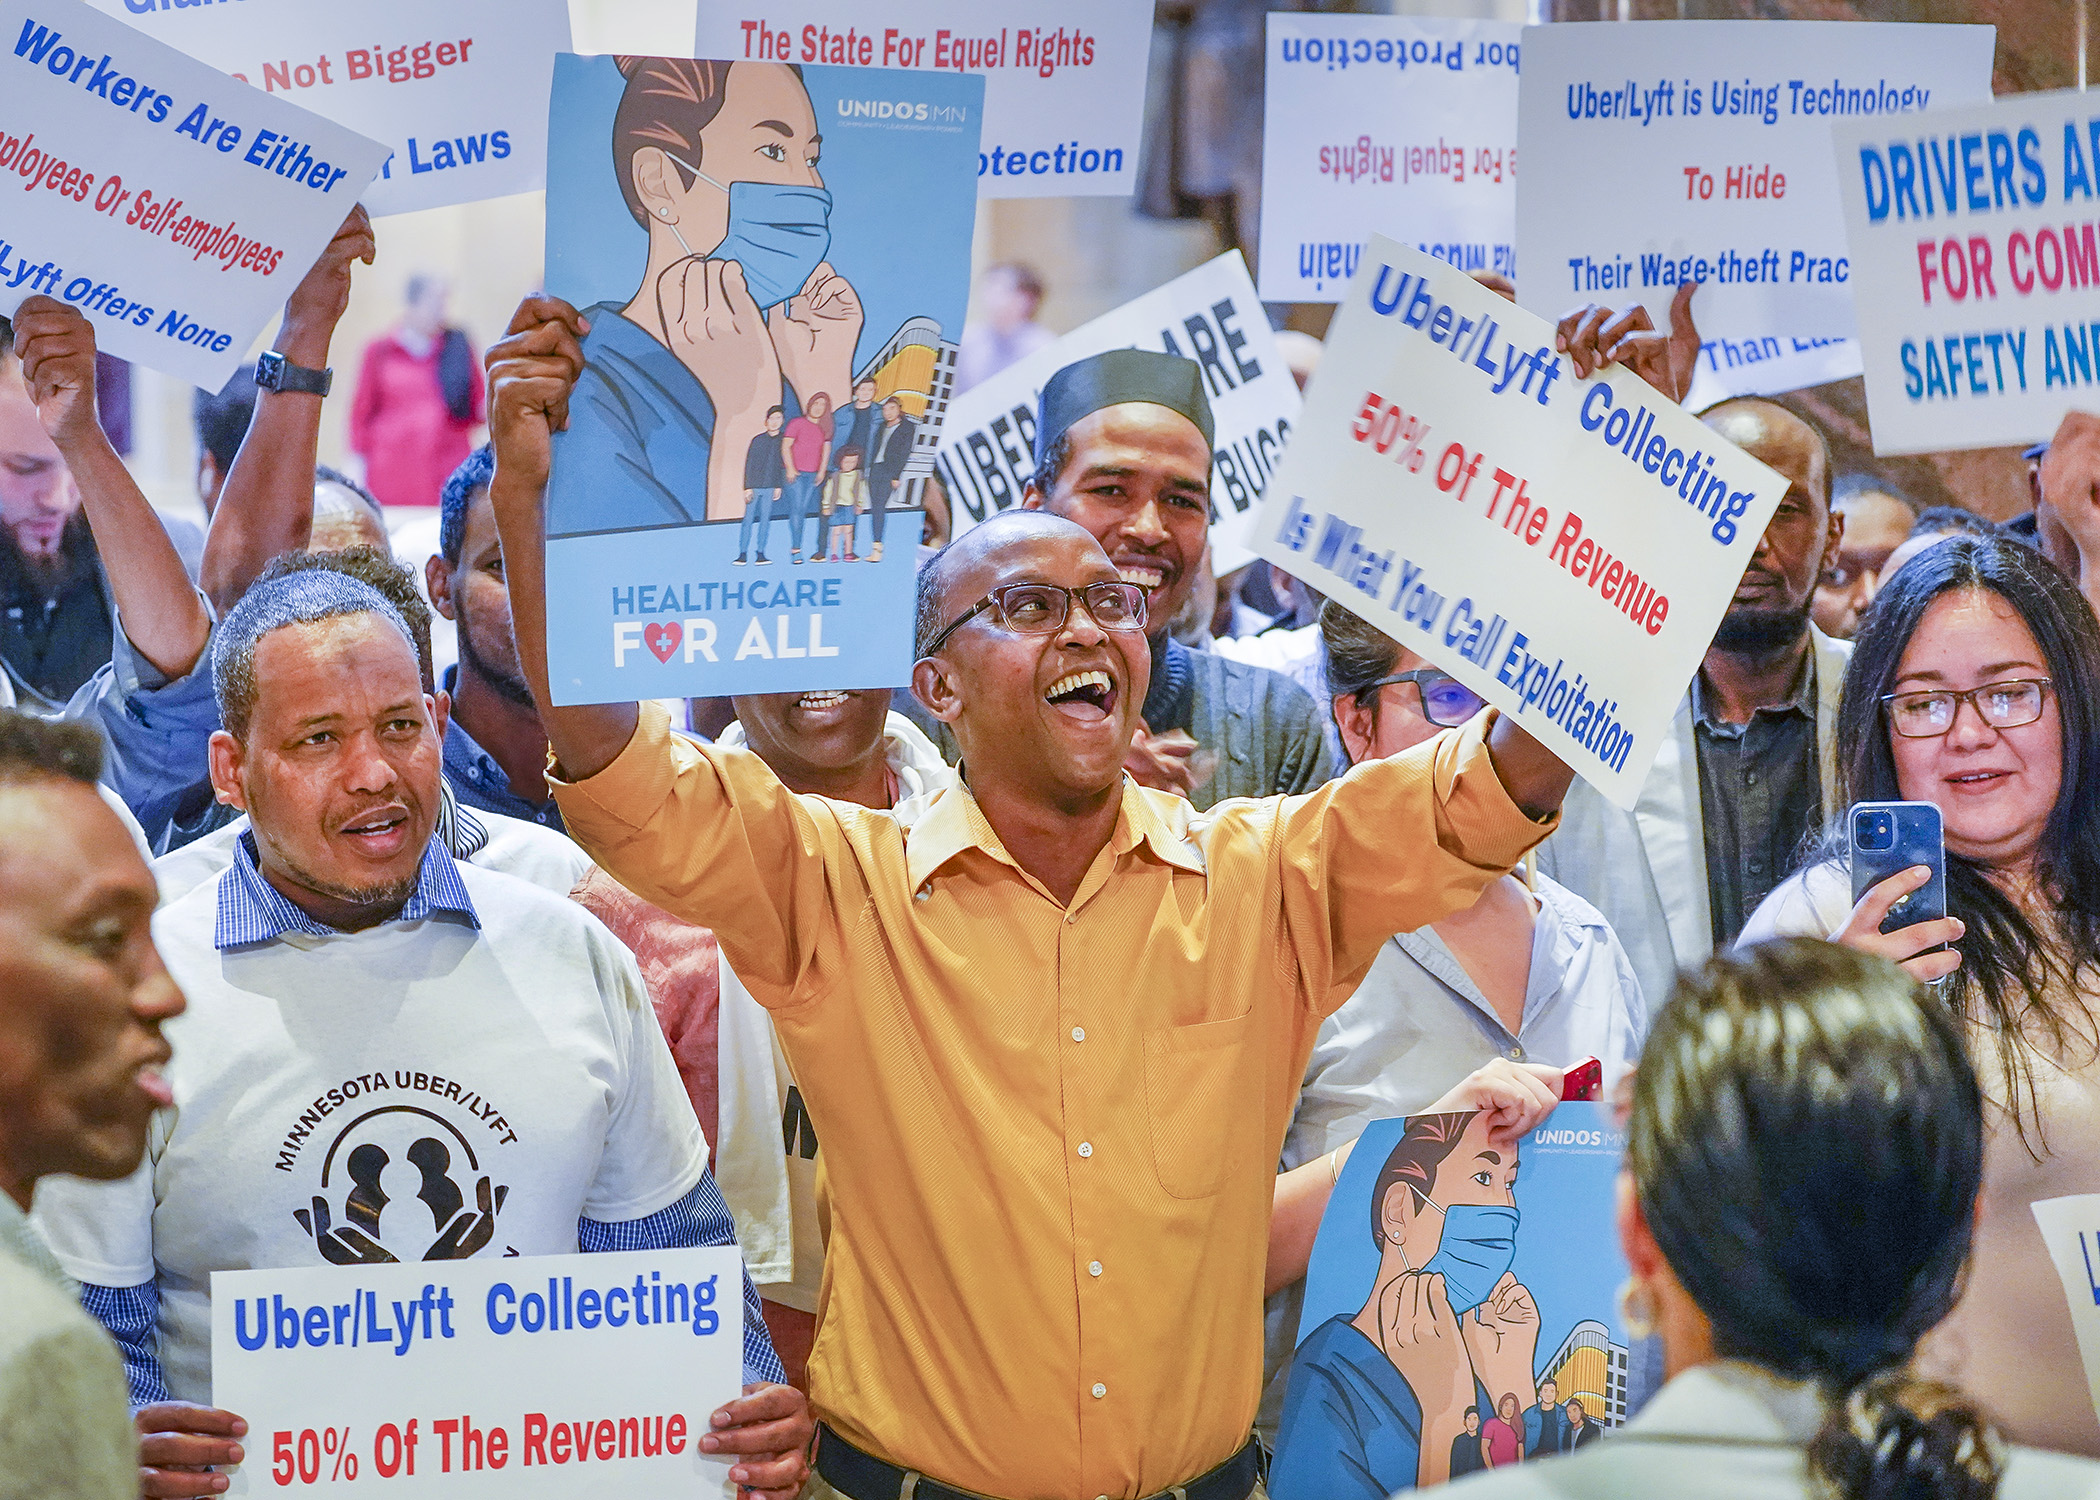 Supporters of a bill that would establish protections for transportation network company drivers rally in front of the House Chamber May 17. (Photo by Andrew VonBank)